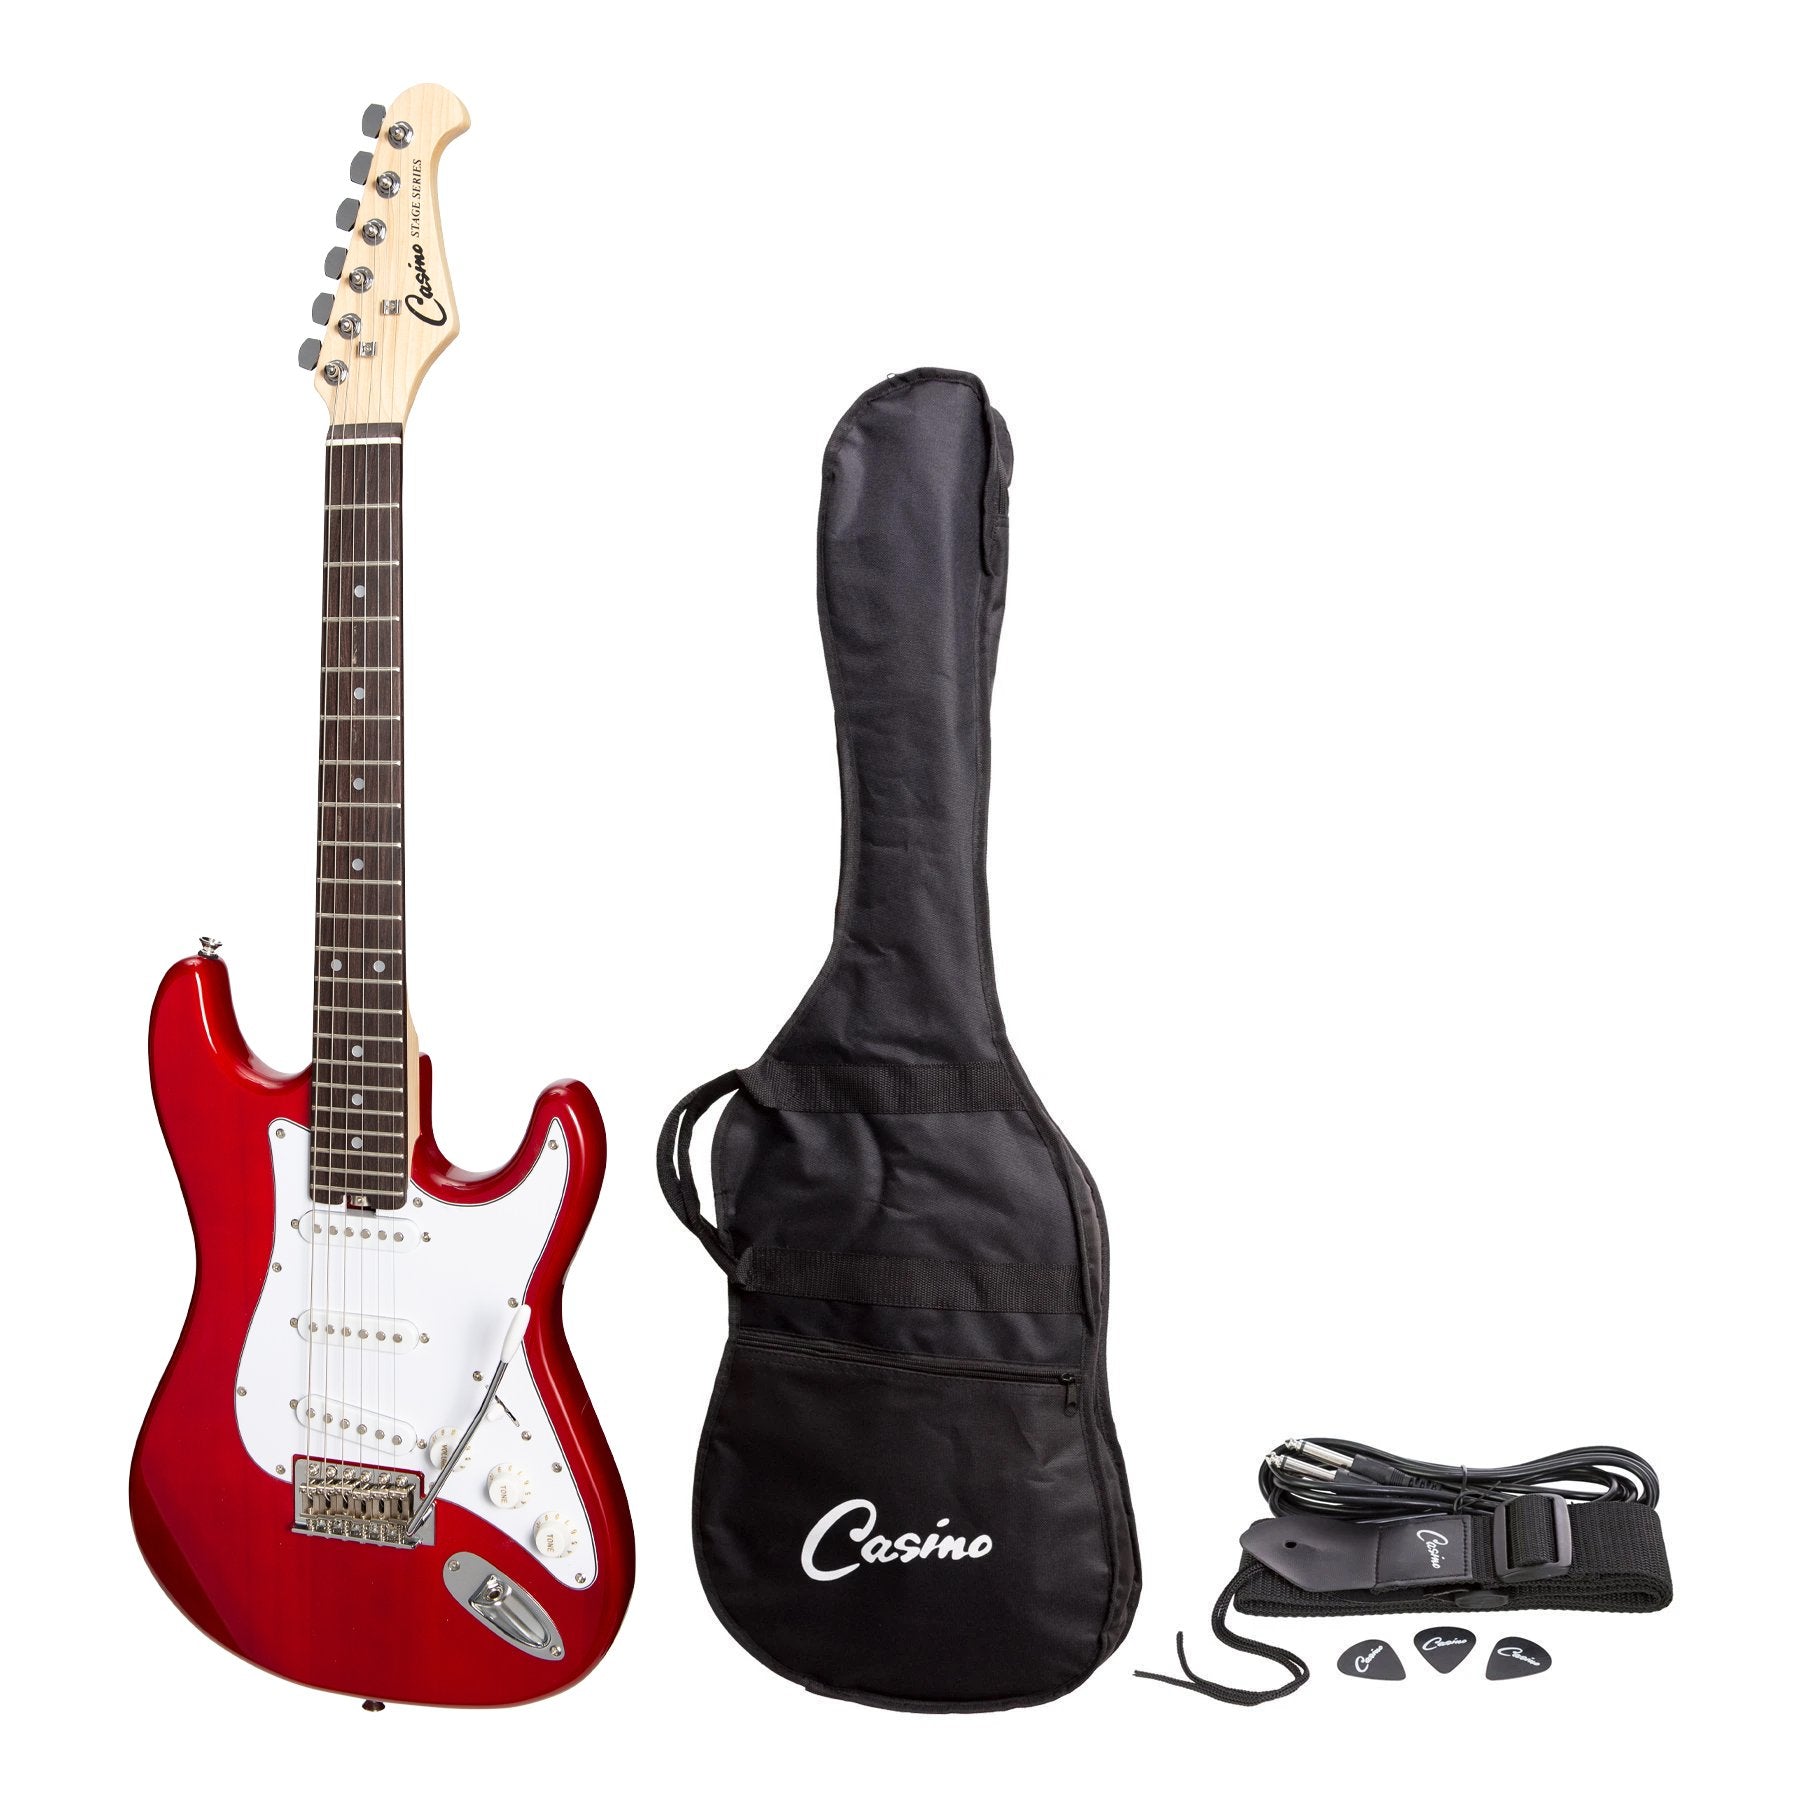 Casino ST-Style Short Scale Electric Guitar Set (Transparent Wine Red)-CST-20-TWR